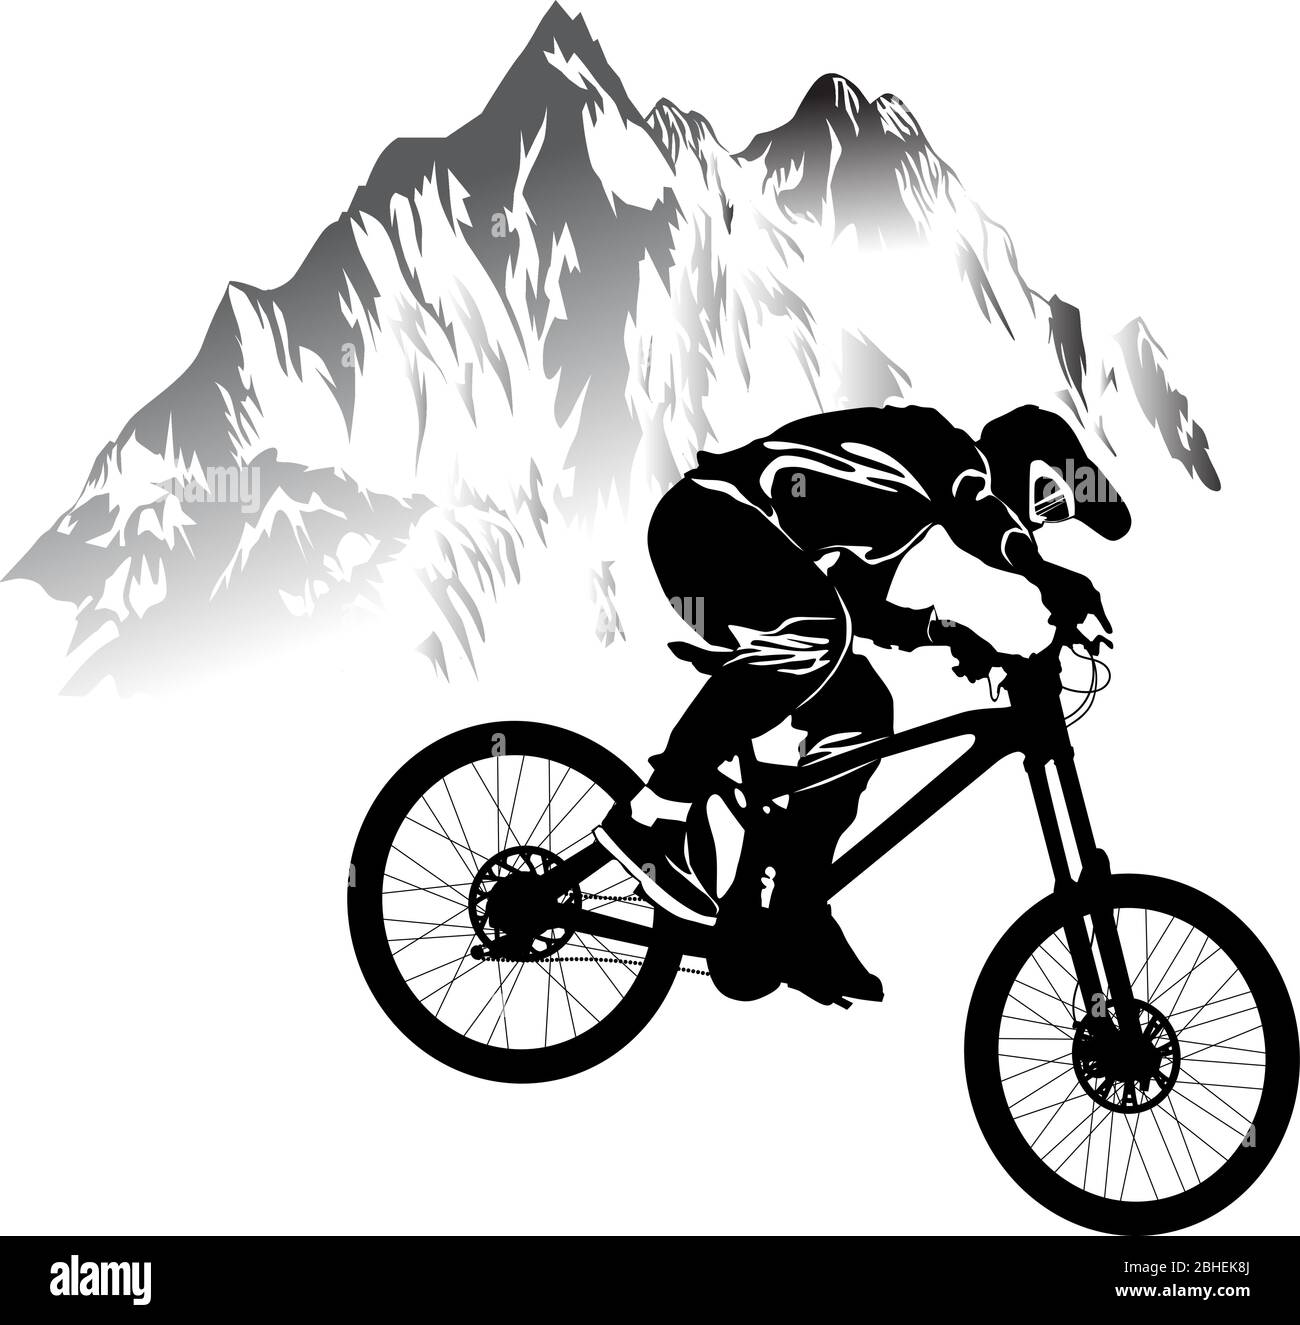 Silhouette of person riding bike Stock Vector Images - Alamy